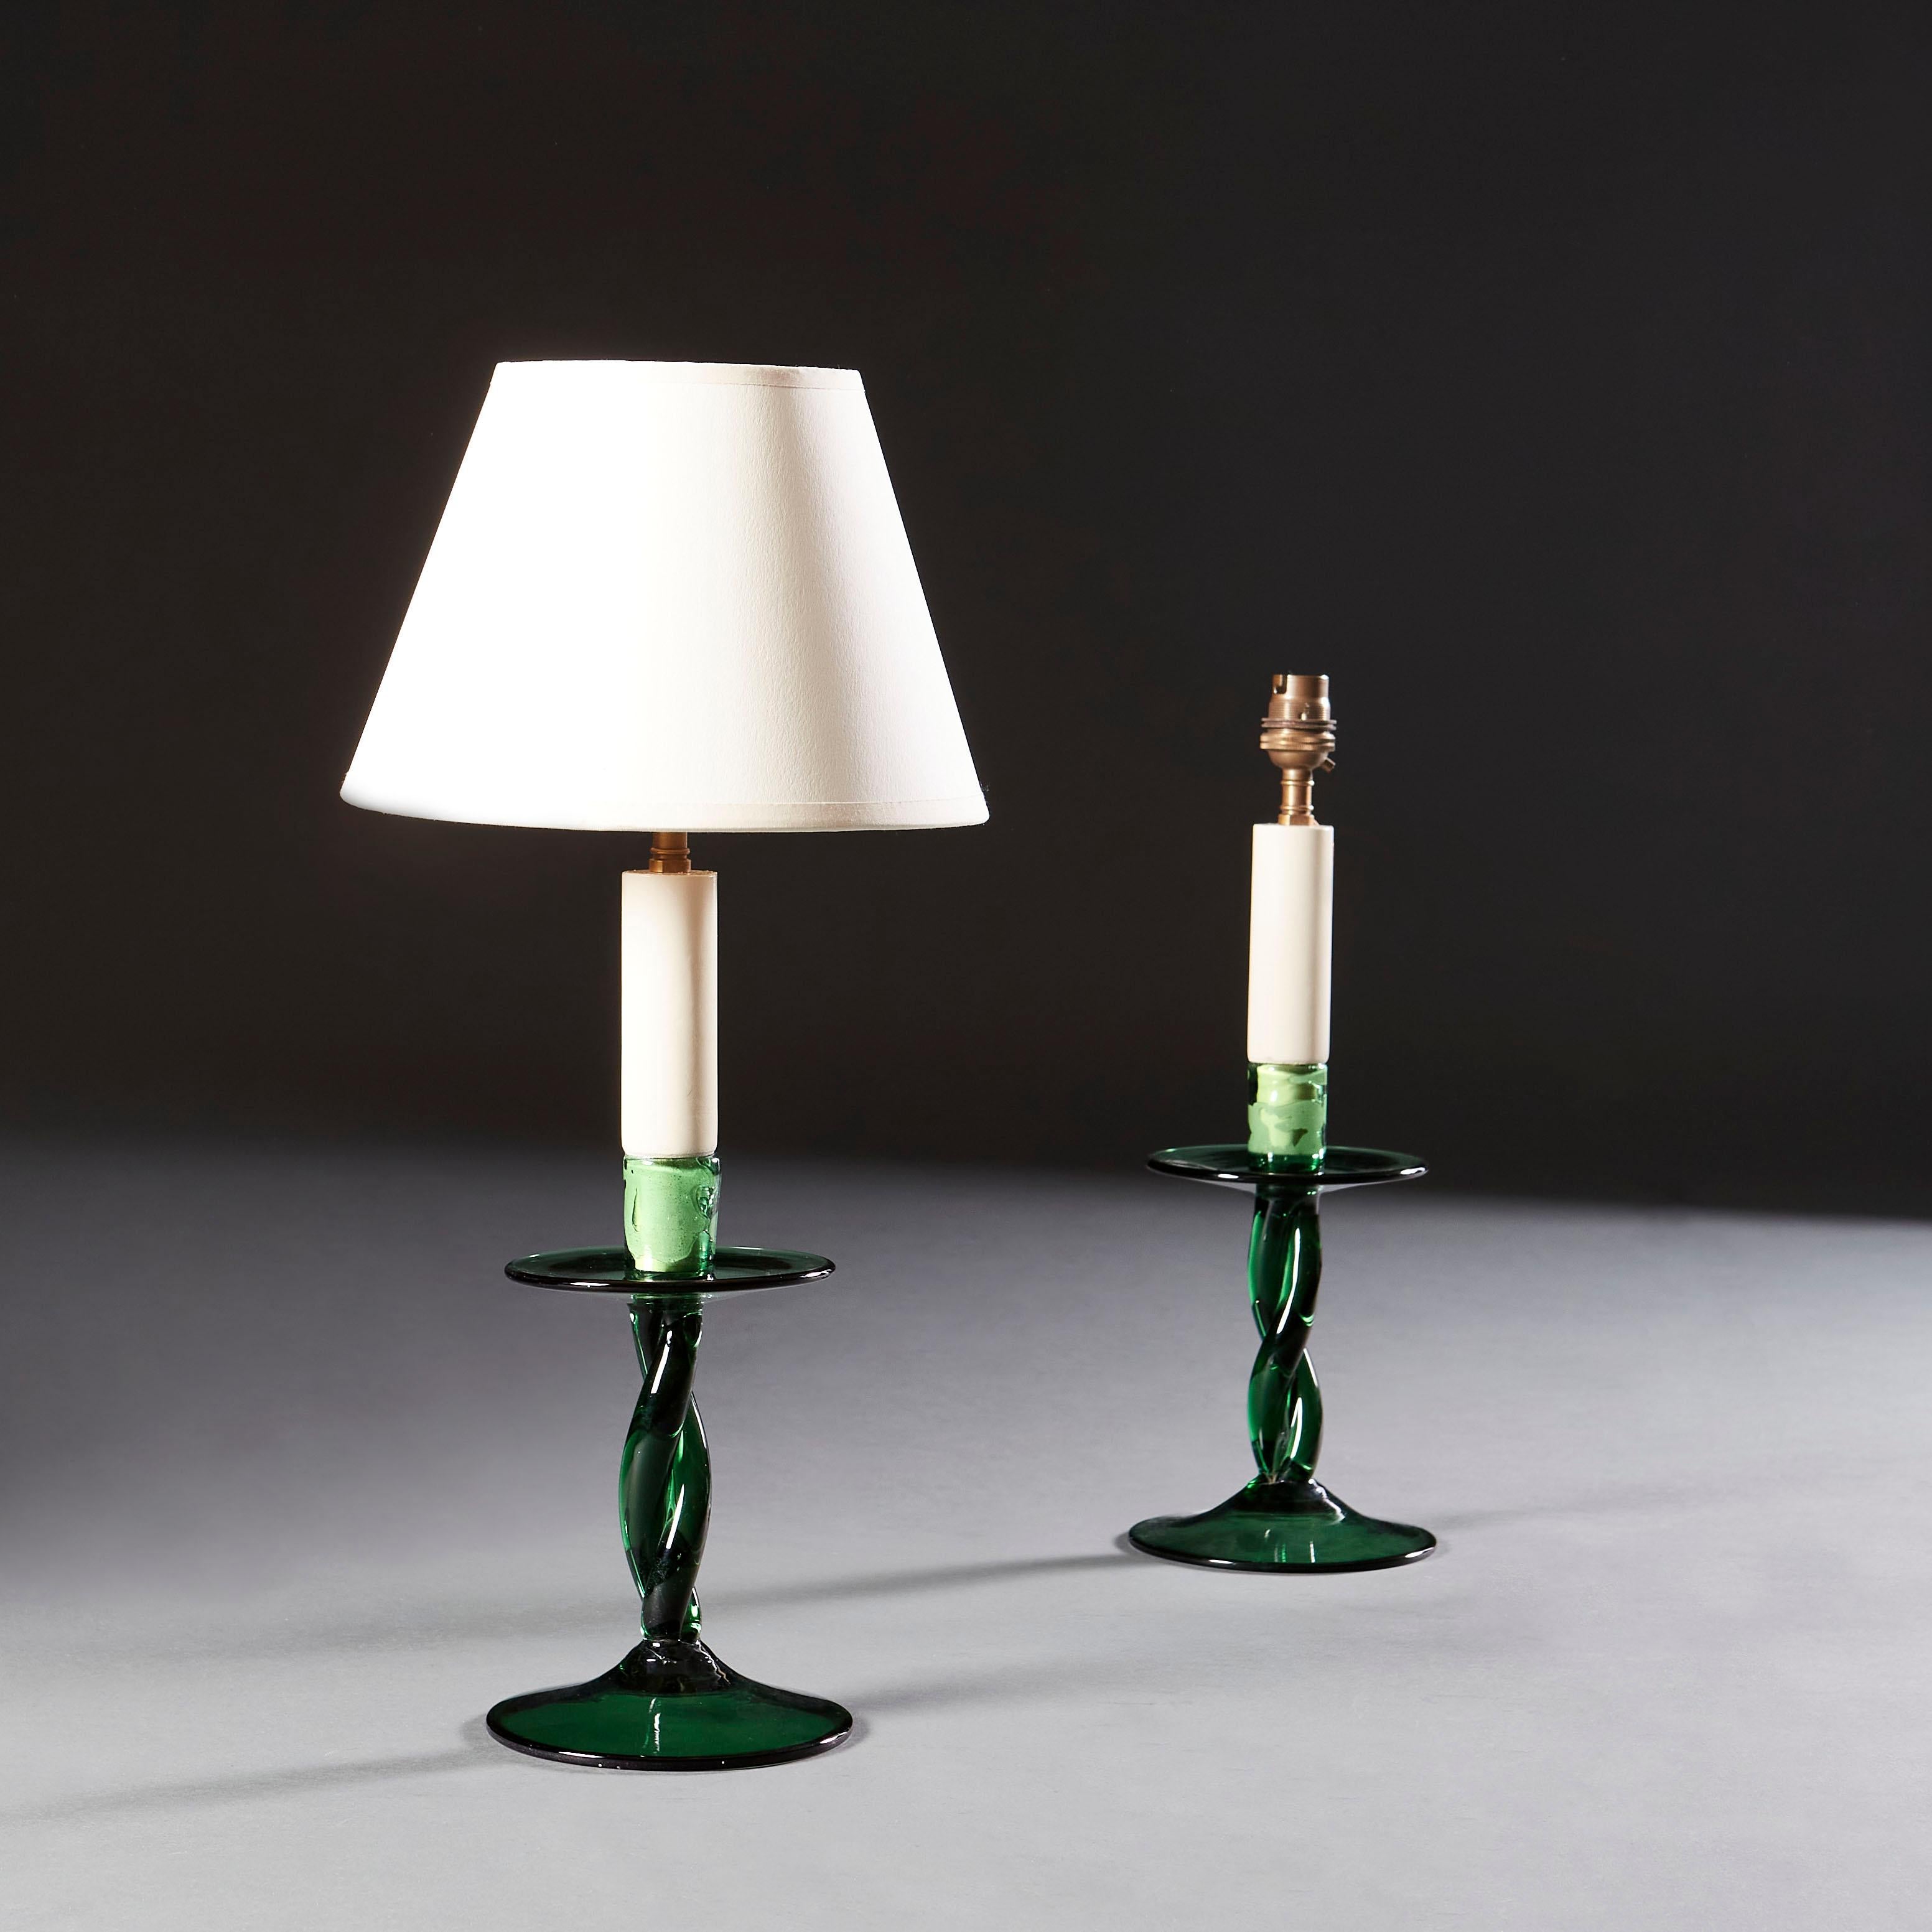 An unusual pair of green glass candlesticks with twisted stems, circular drip trays and bases now converted as lamps.

Currently wired for the UK. Please enquire for rewiring services.

Please note: Lampshades not included.